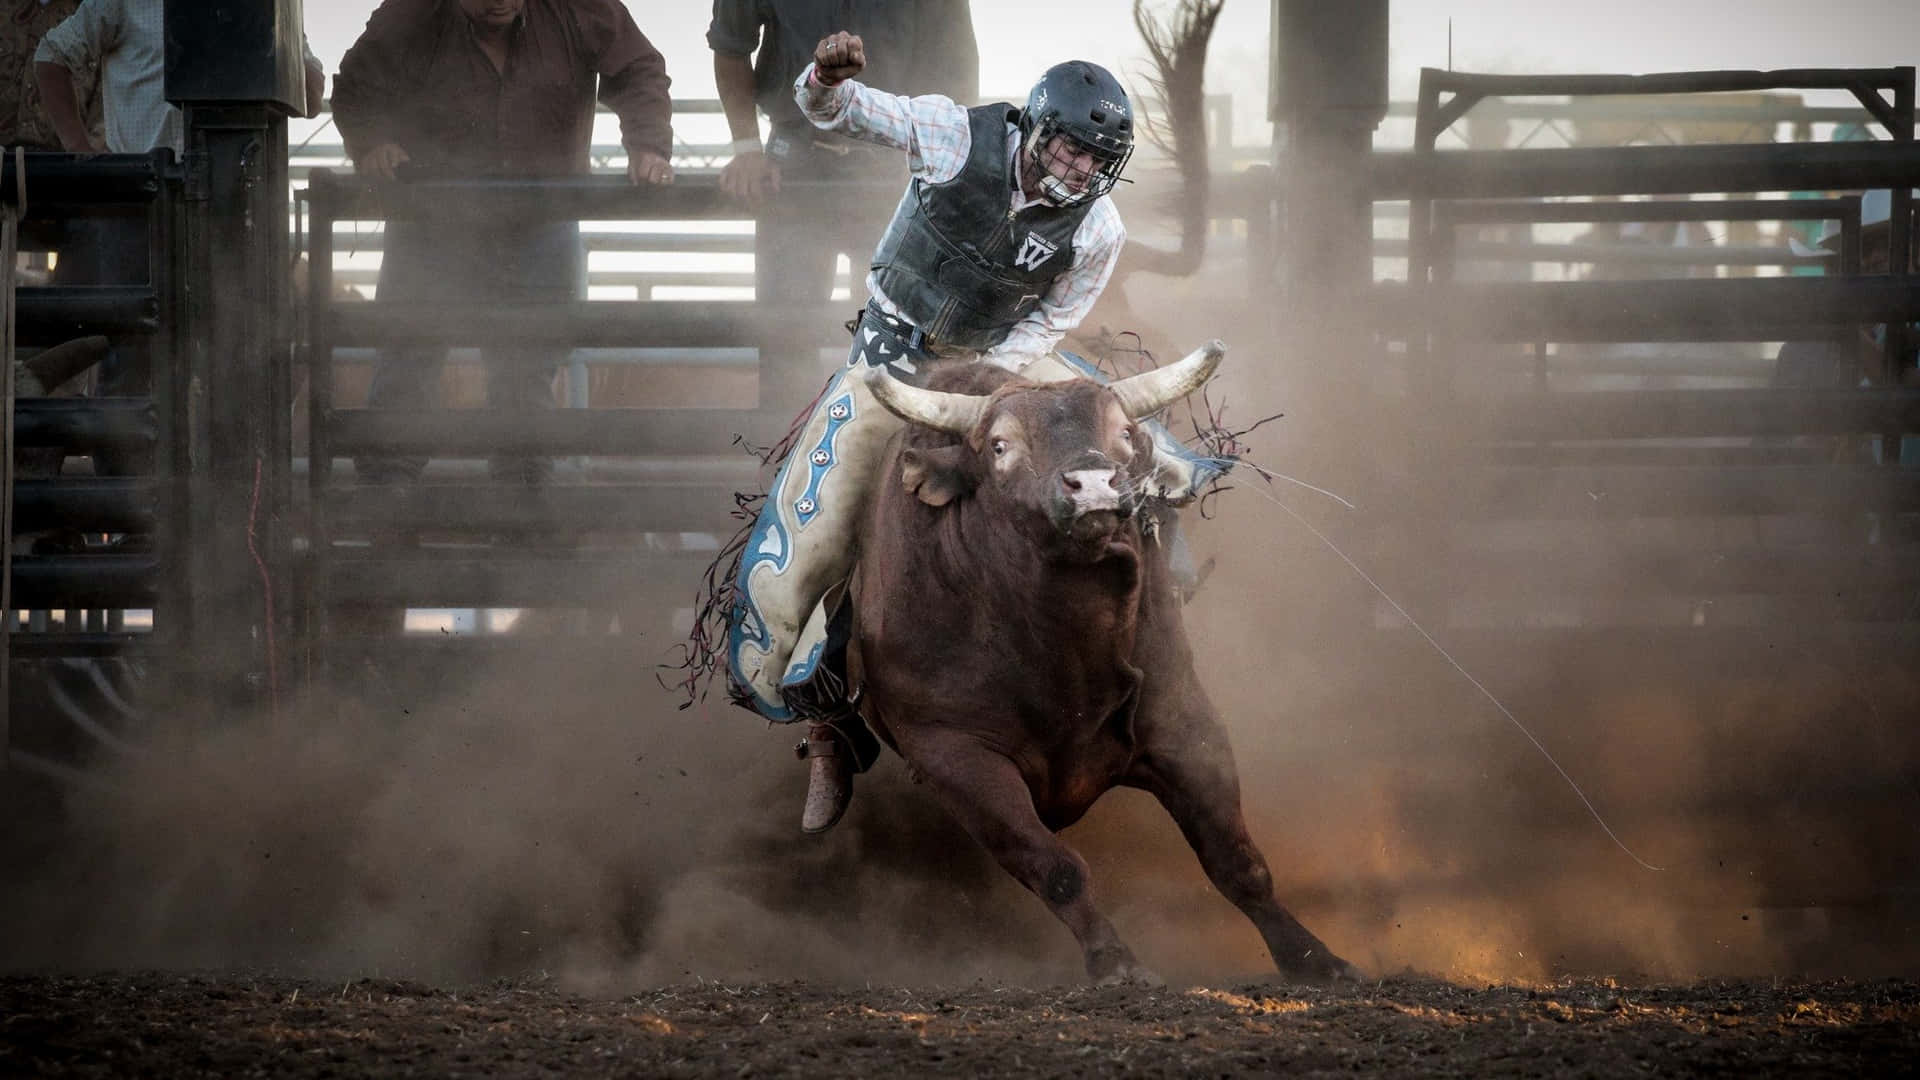 Being a Bull Rider Requires Great Courage and Ability